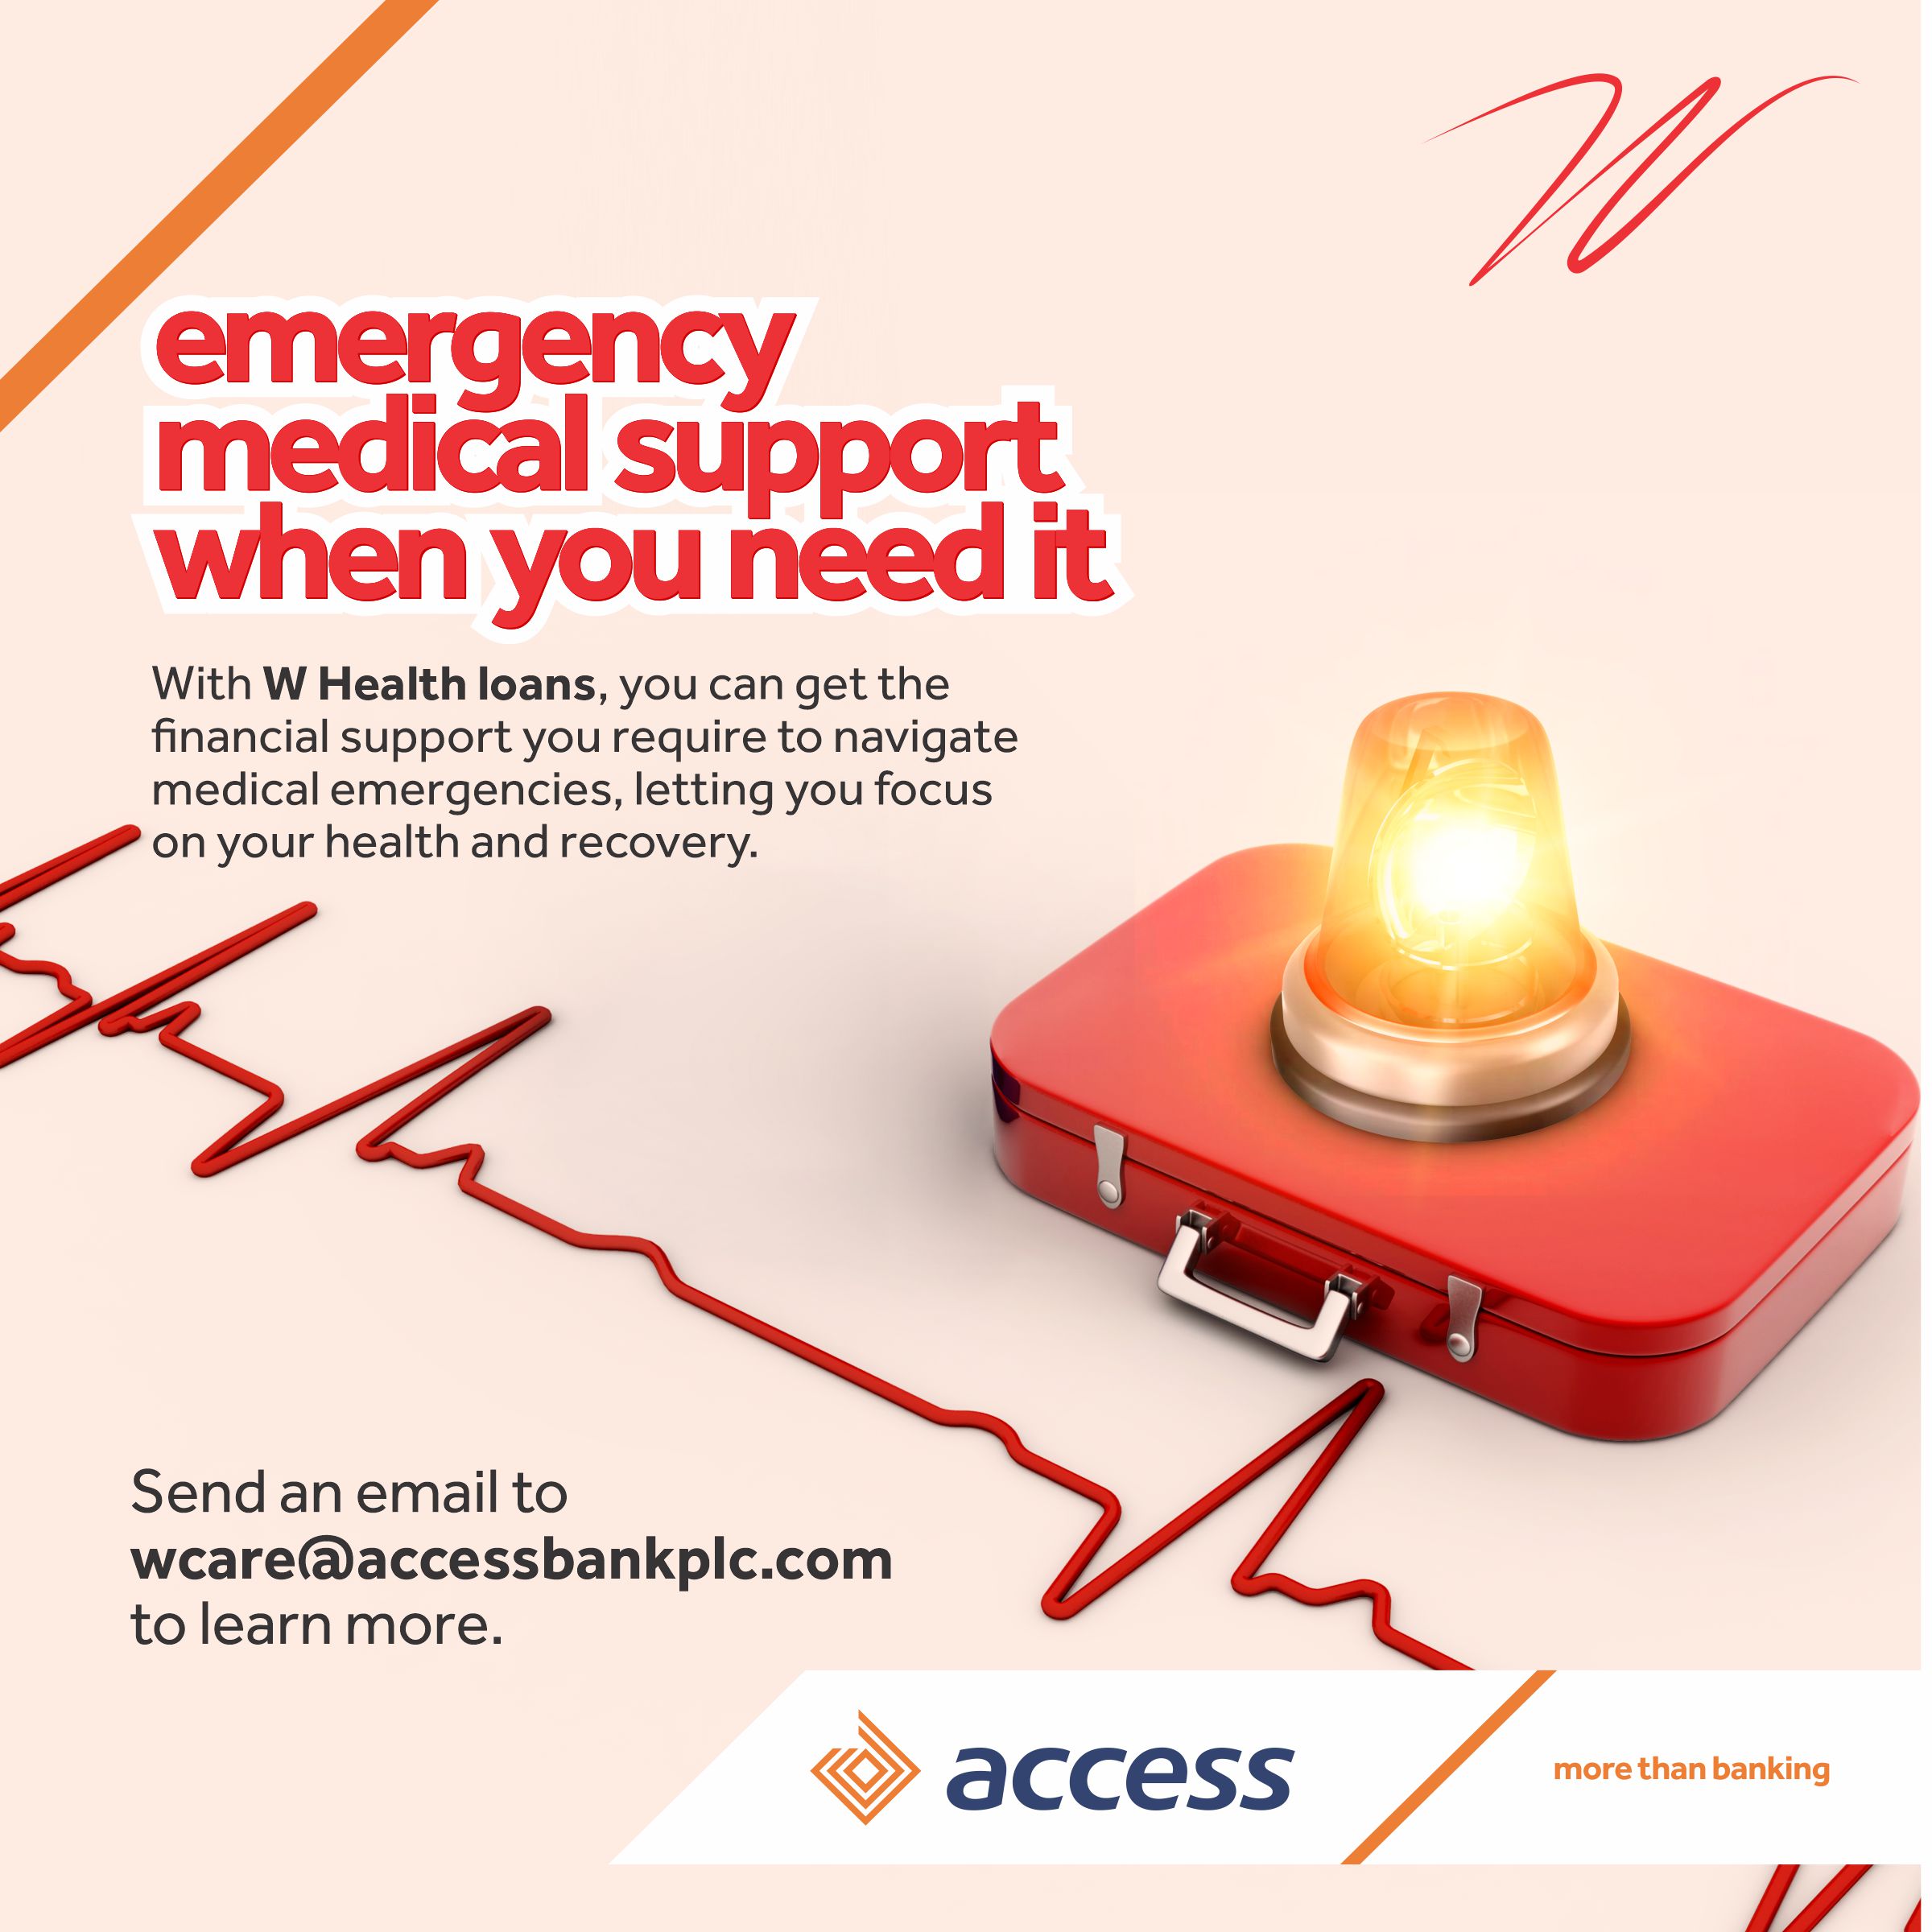 Access Bank Upgrades its W Health Loan Offering to Empower Women